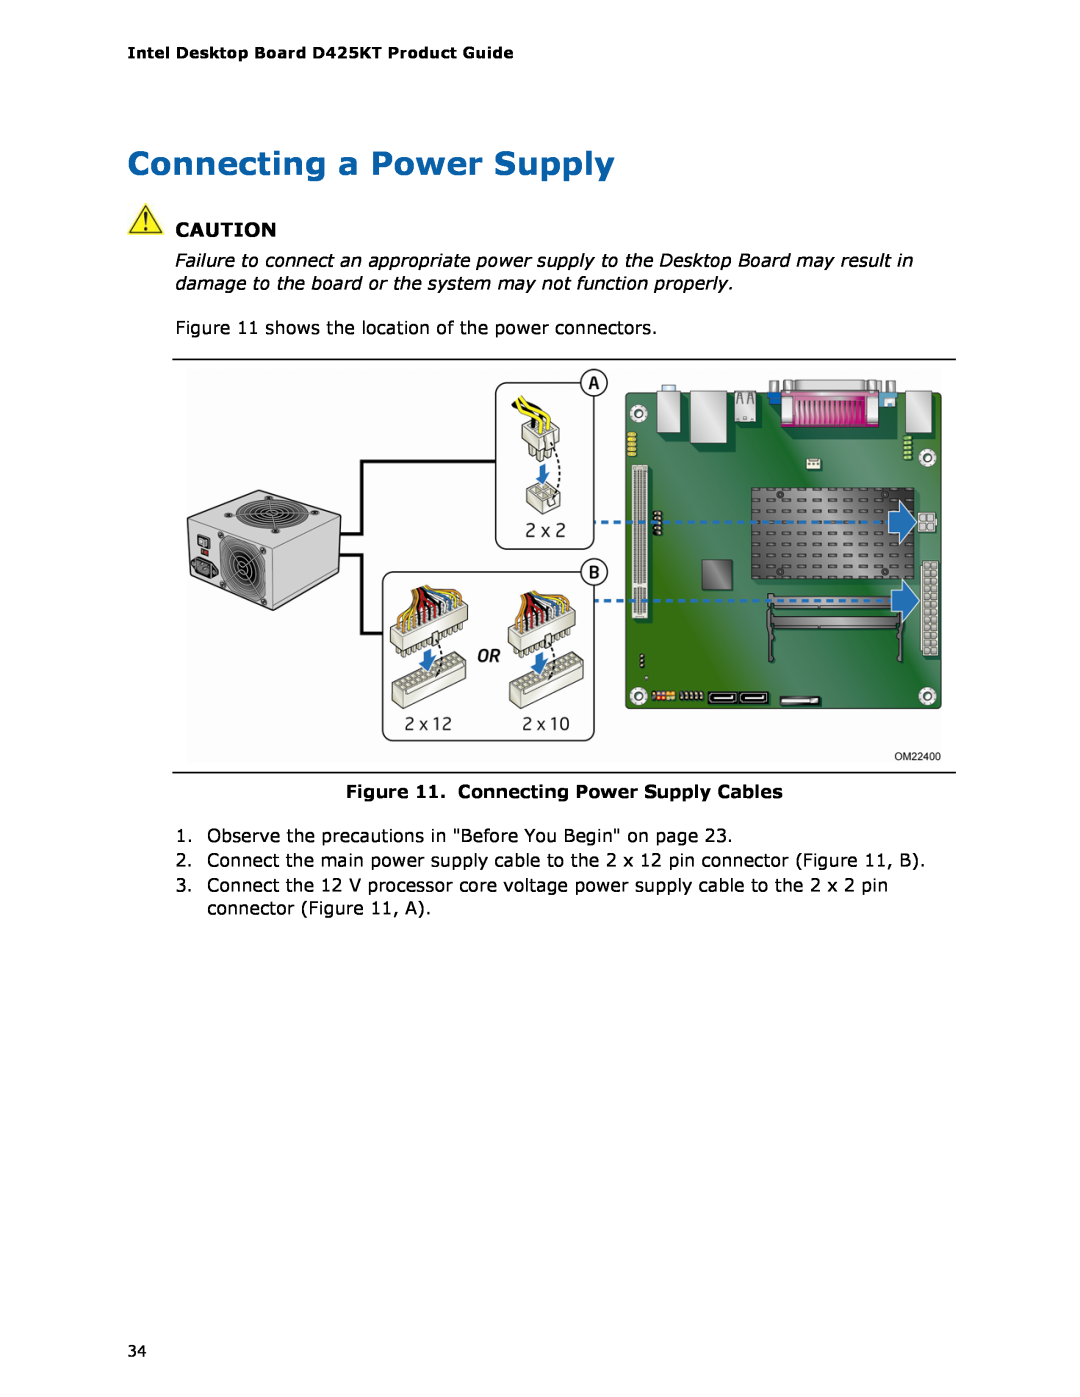 Intel D425KT manual Connecting a Power Supply, Connecting Power Supply Cables 